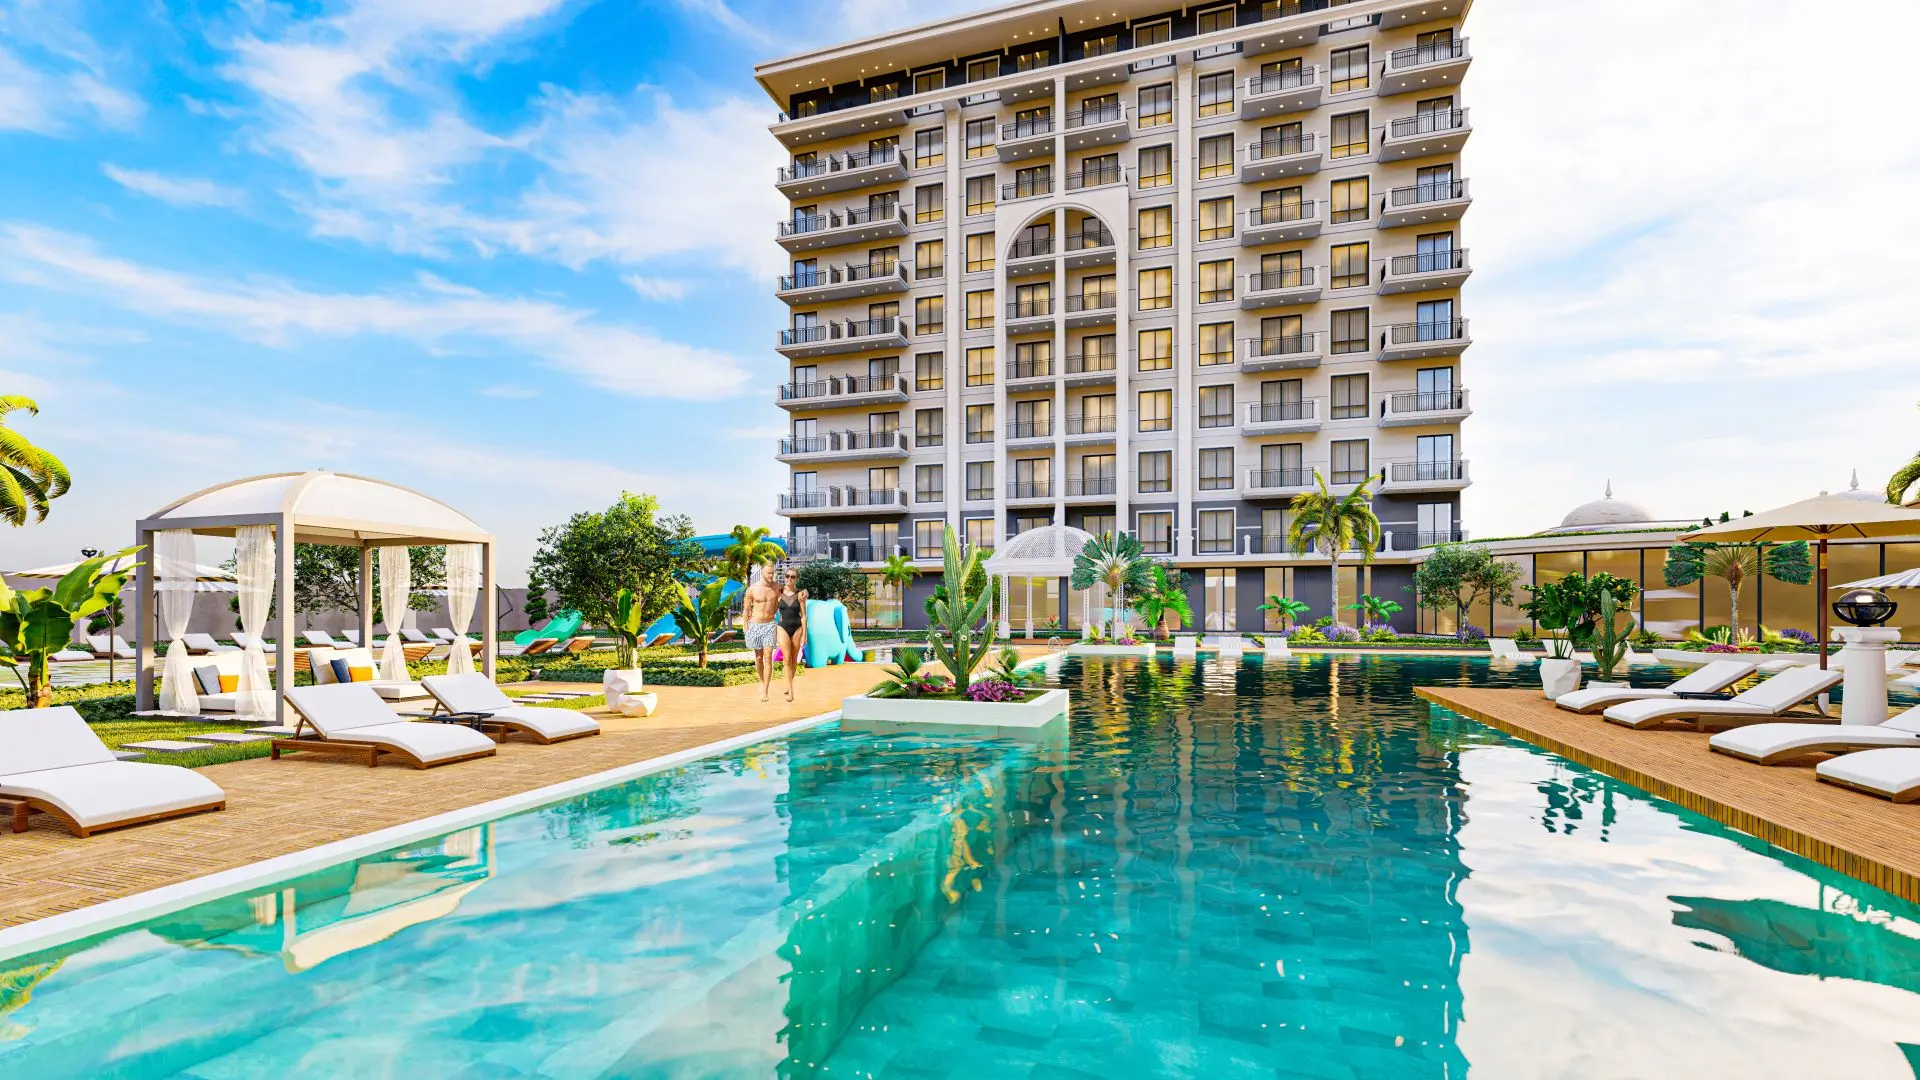 START OF SALES OF THE NEW GRAND PROJECT IN DEMIRTAS ALANYA